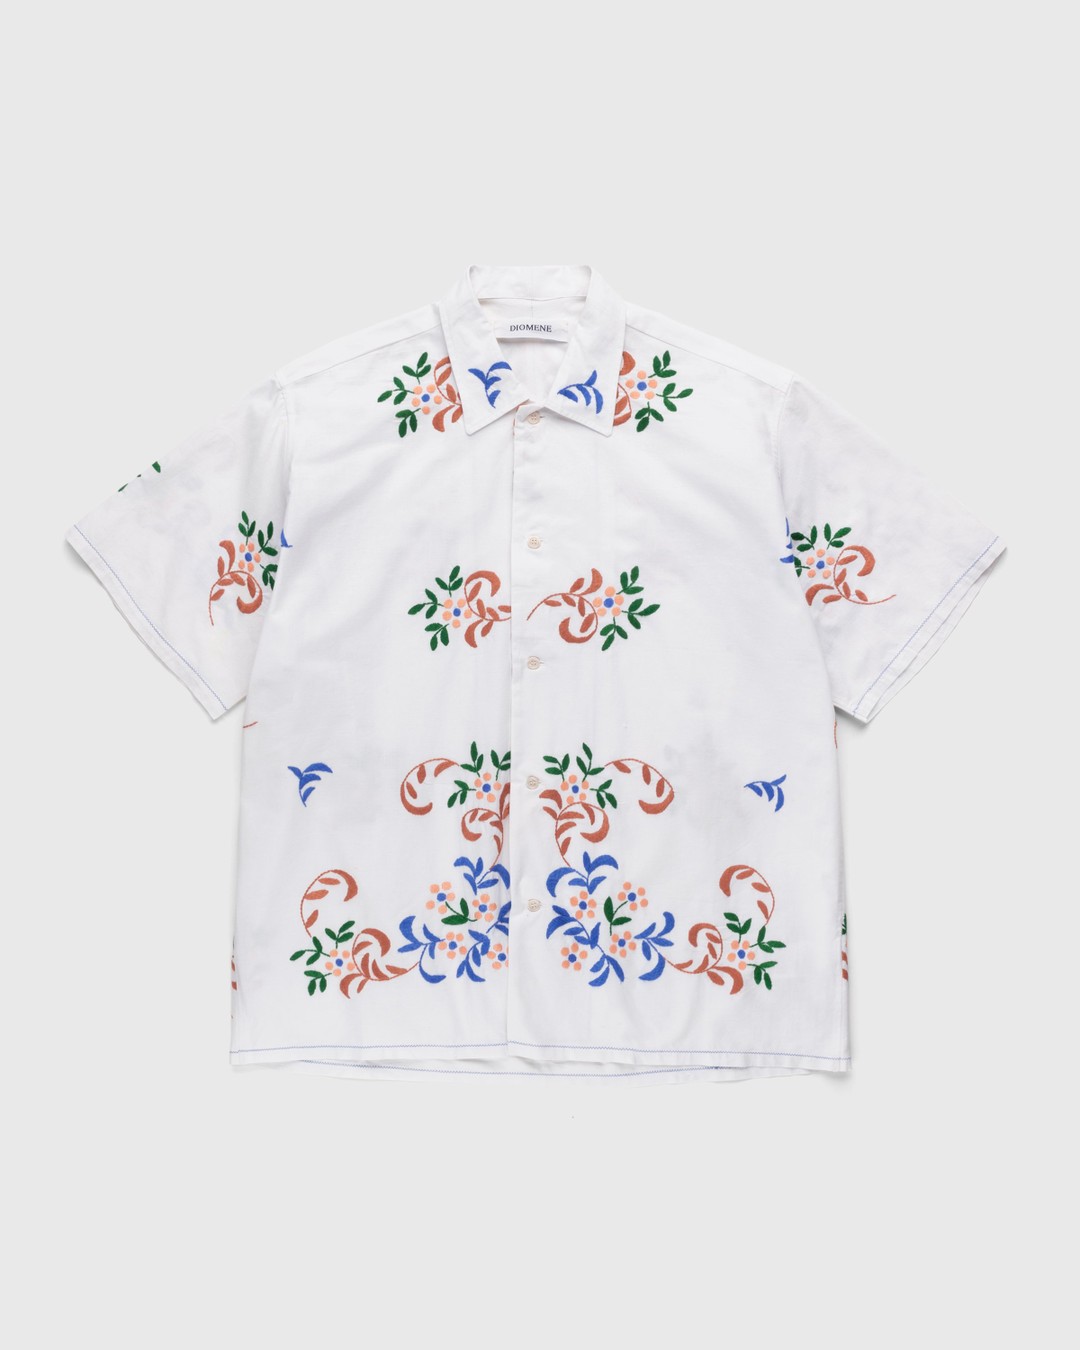 Diomene by Damir Doma – Embroidered Vacation Shirt White/Blue - Shirts - White - Image 1